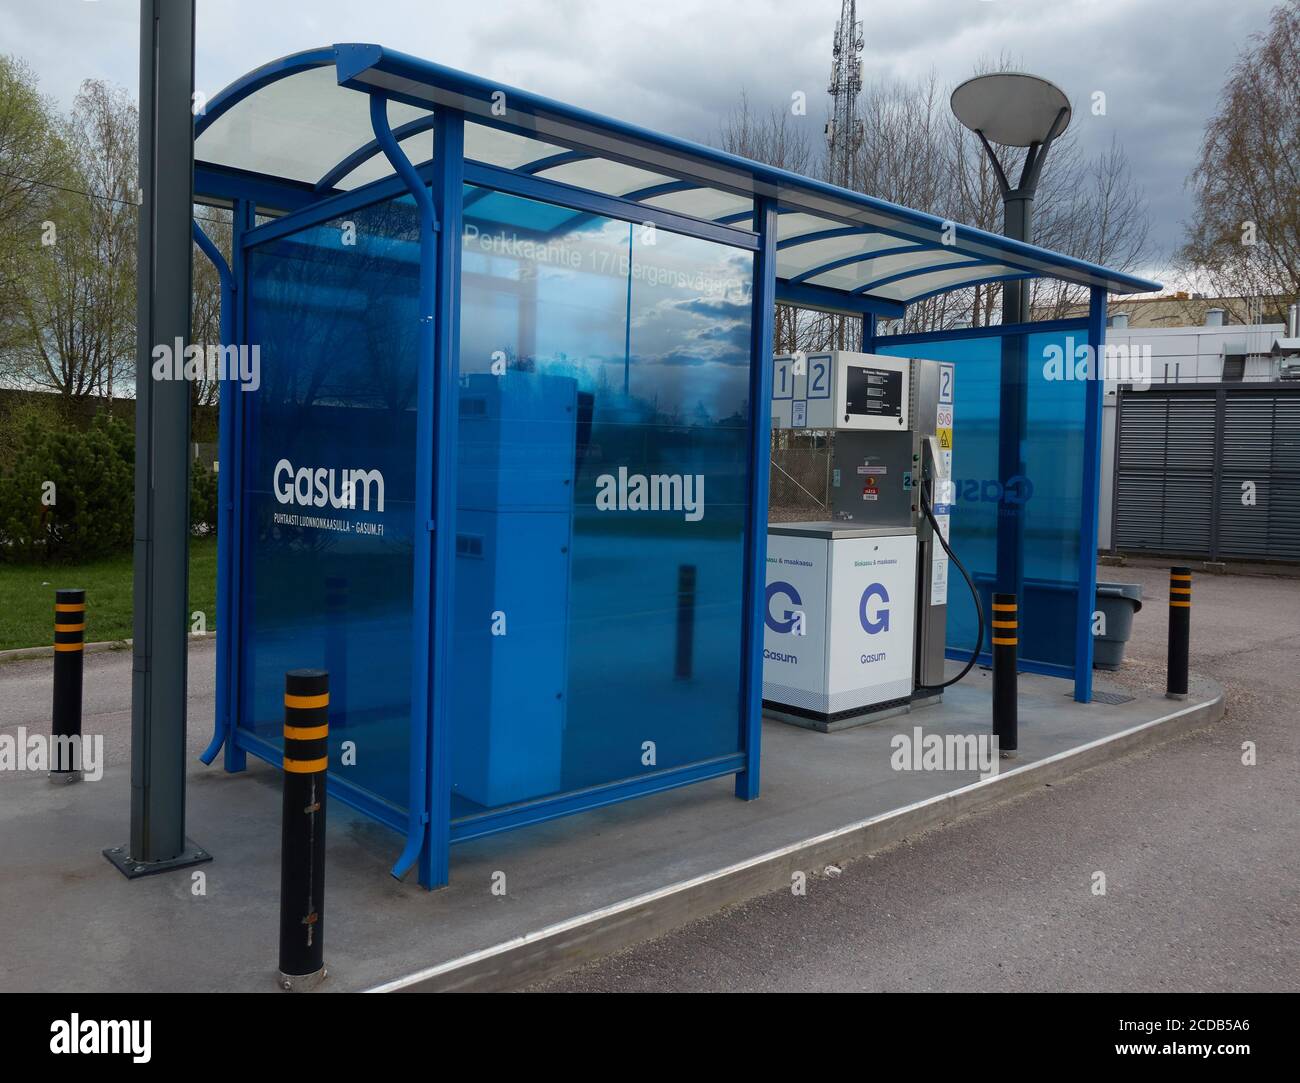 Espoo, Finland - May 6, 2020: Gasum gas company unmanned compressed natural gas (CNG) dispenser for cars that are able to utilize liquified natural ga Stock Photo